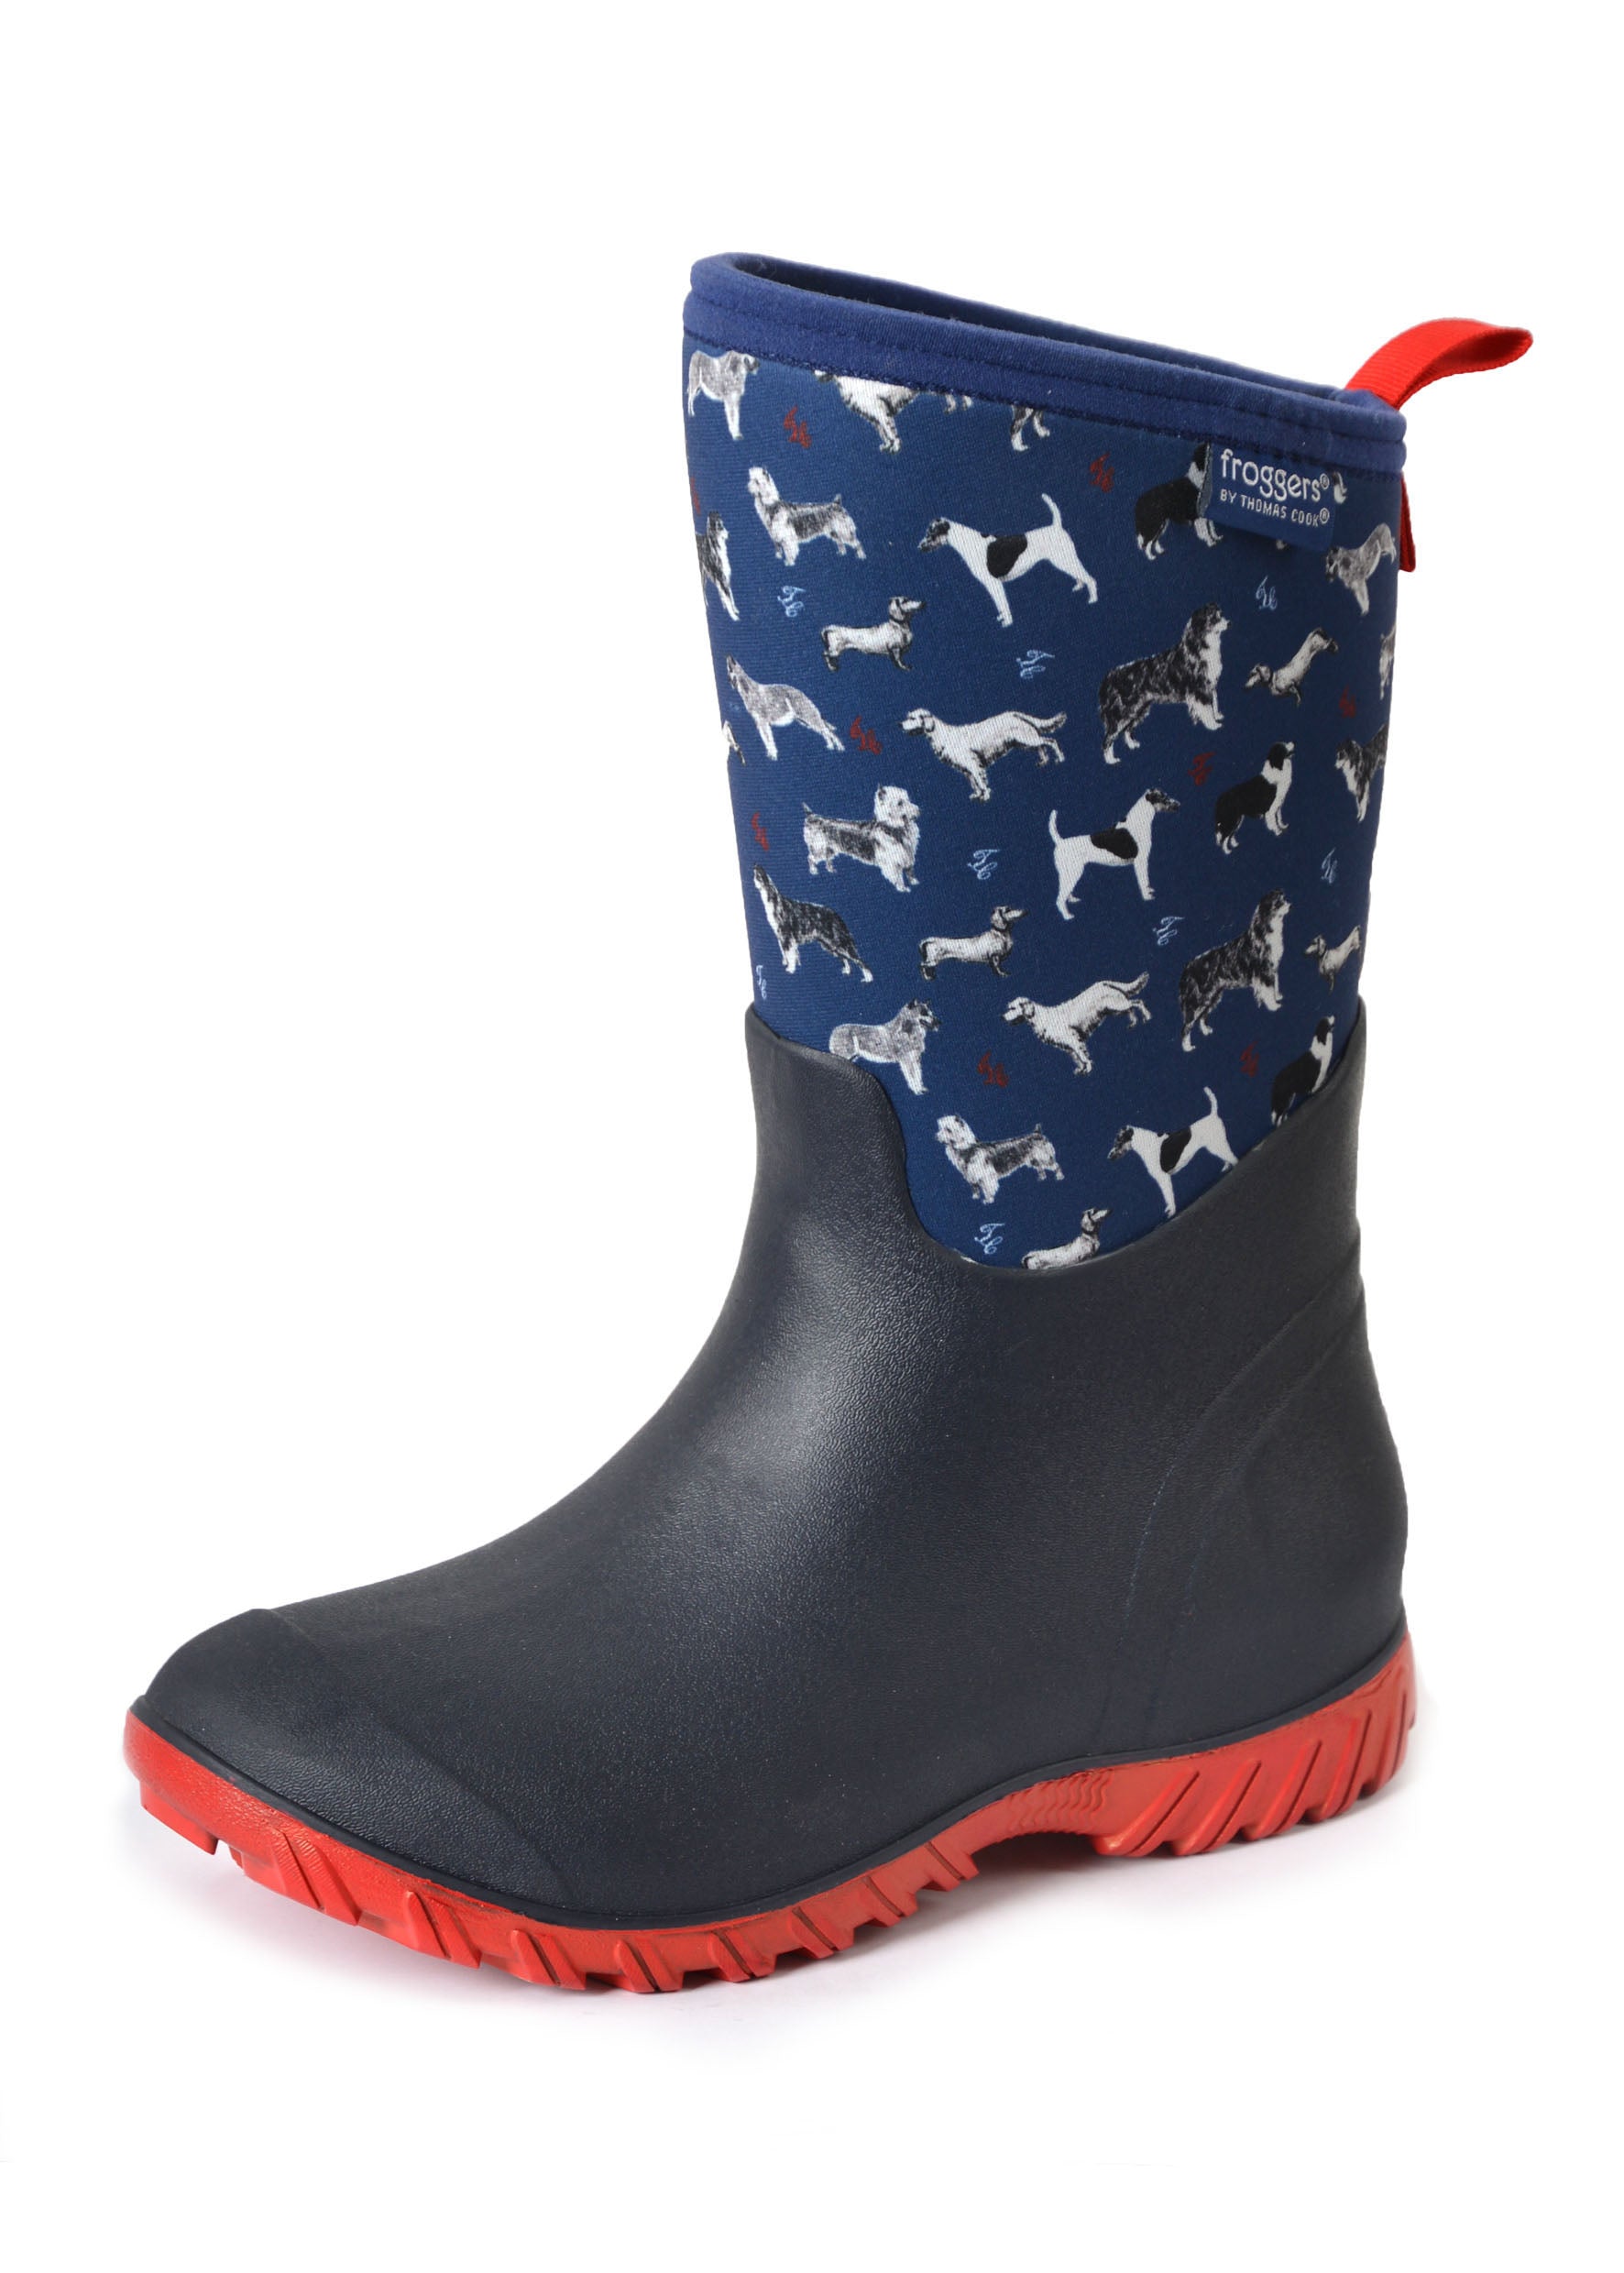 Thomas Cook Froggers Munro Gumboot - CLEARANCE